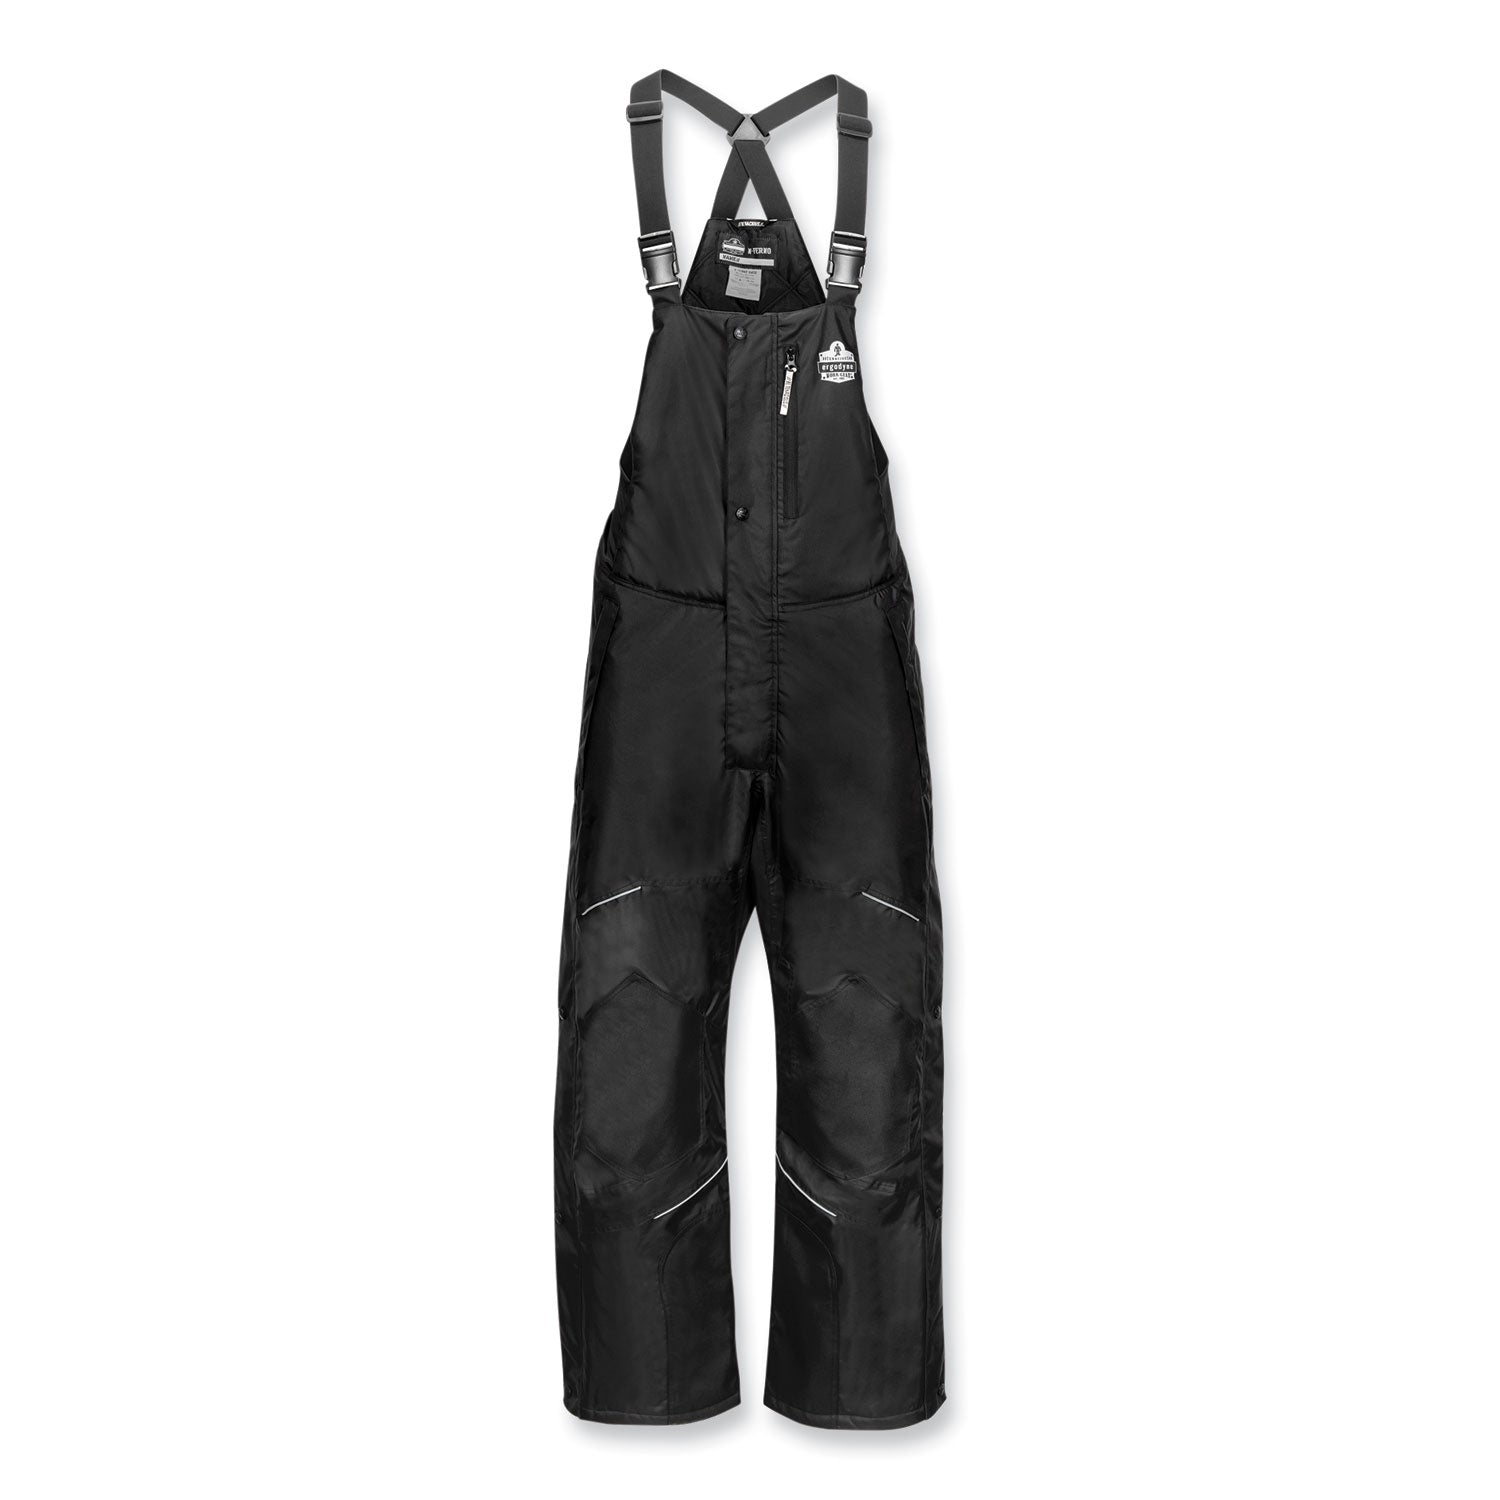 n-ferno-6472-thermal-bib-with-300d-oxford-shell-medium-black-ships-in-1-3-business-days_ego41223 - 1